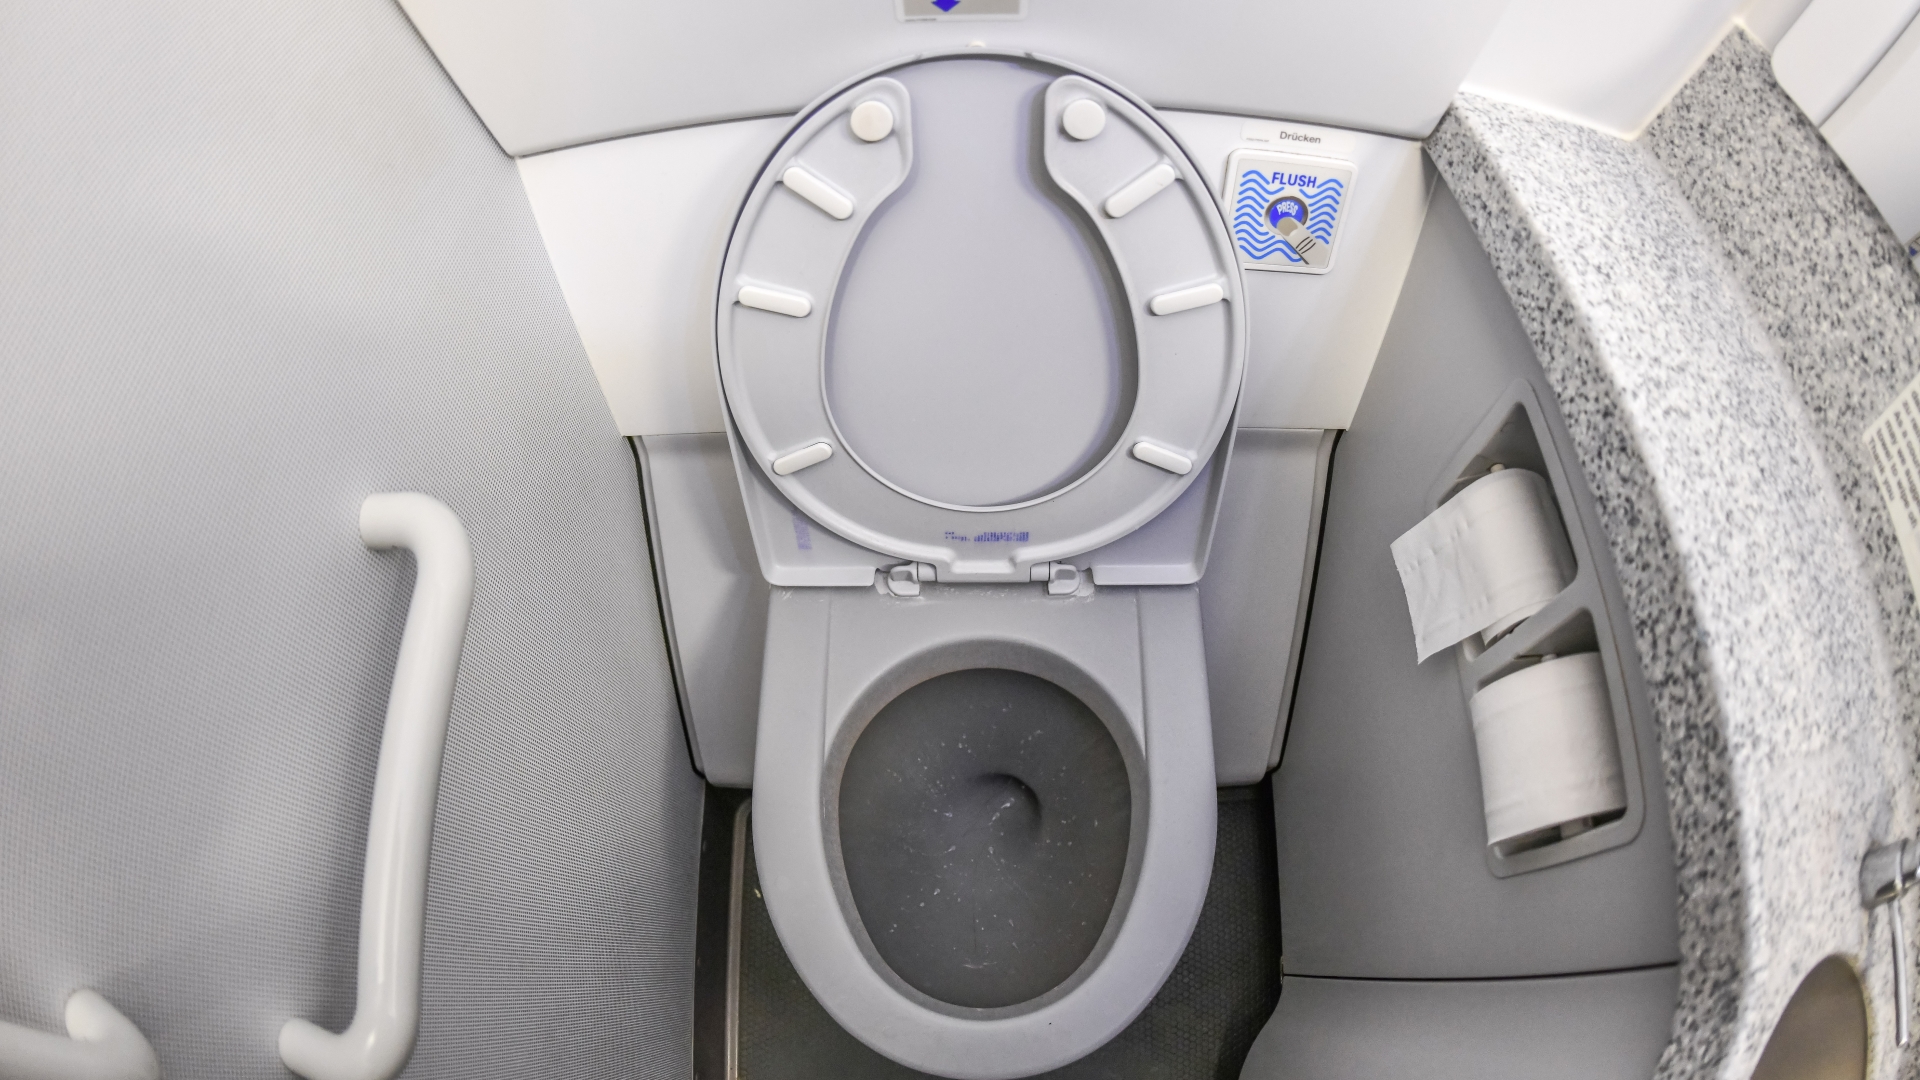 Pilot – Here’s the procedure for emptying plane toilets. It’s a common job among ground crew.